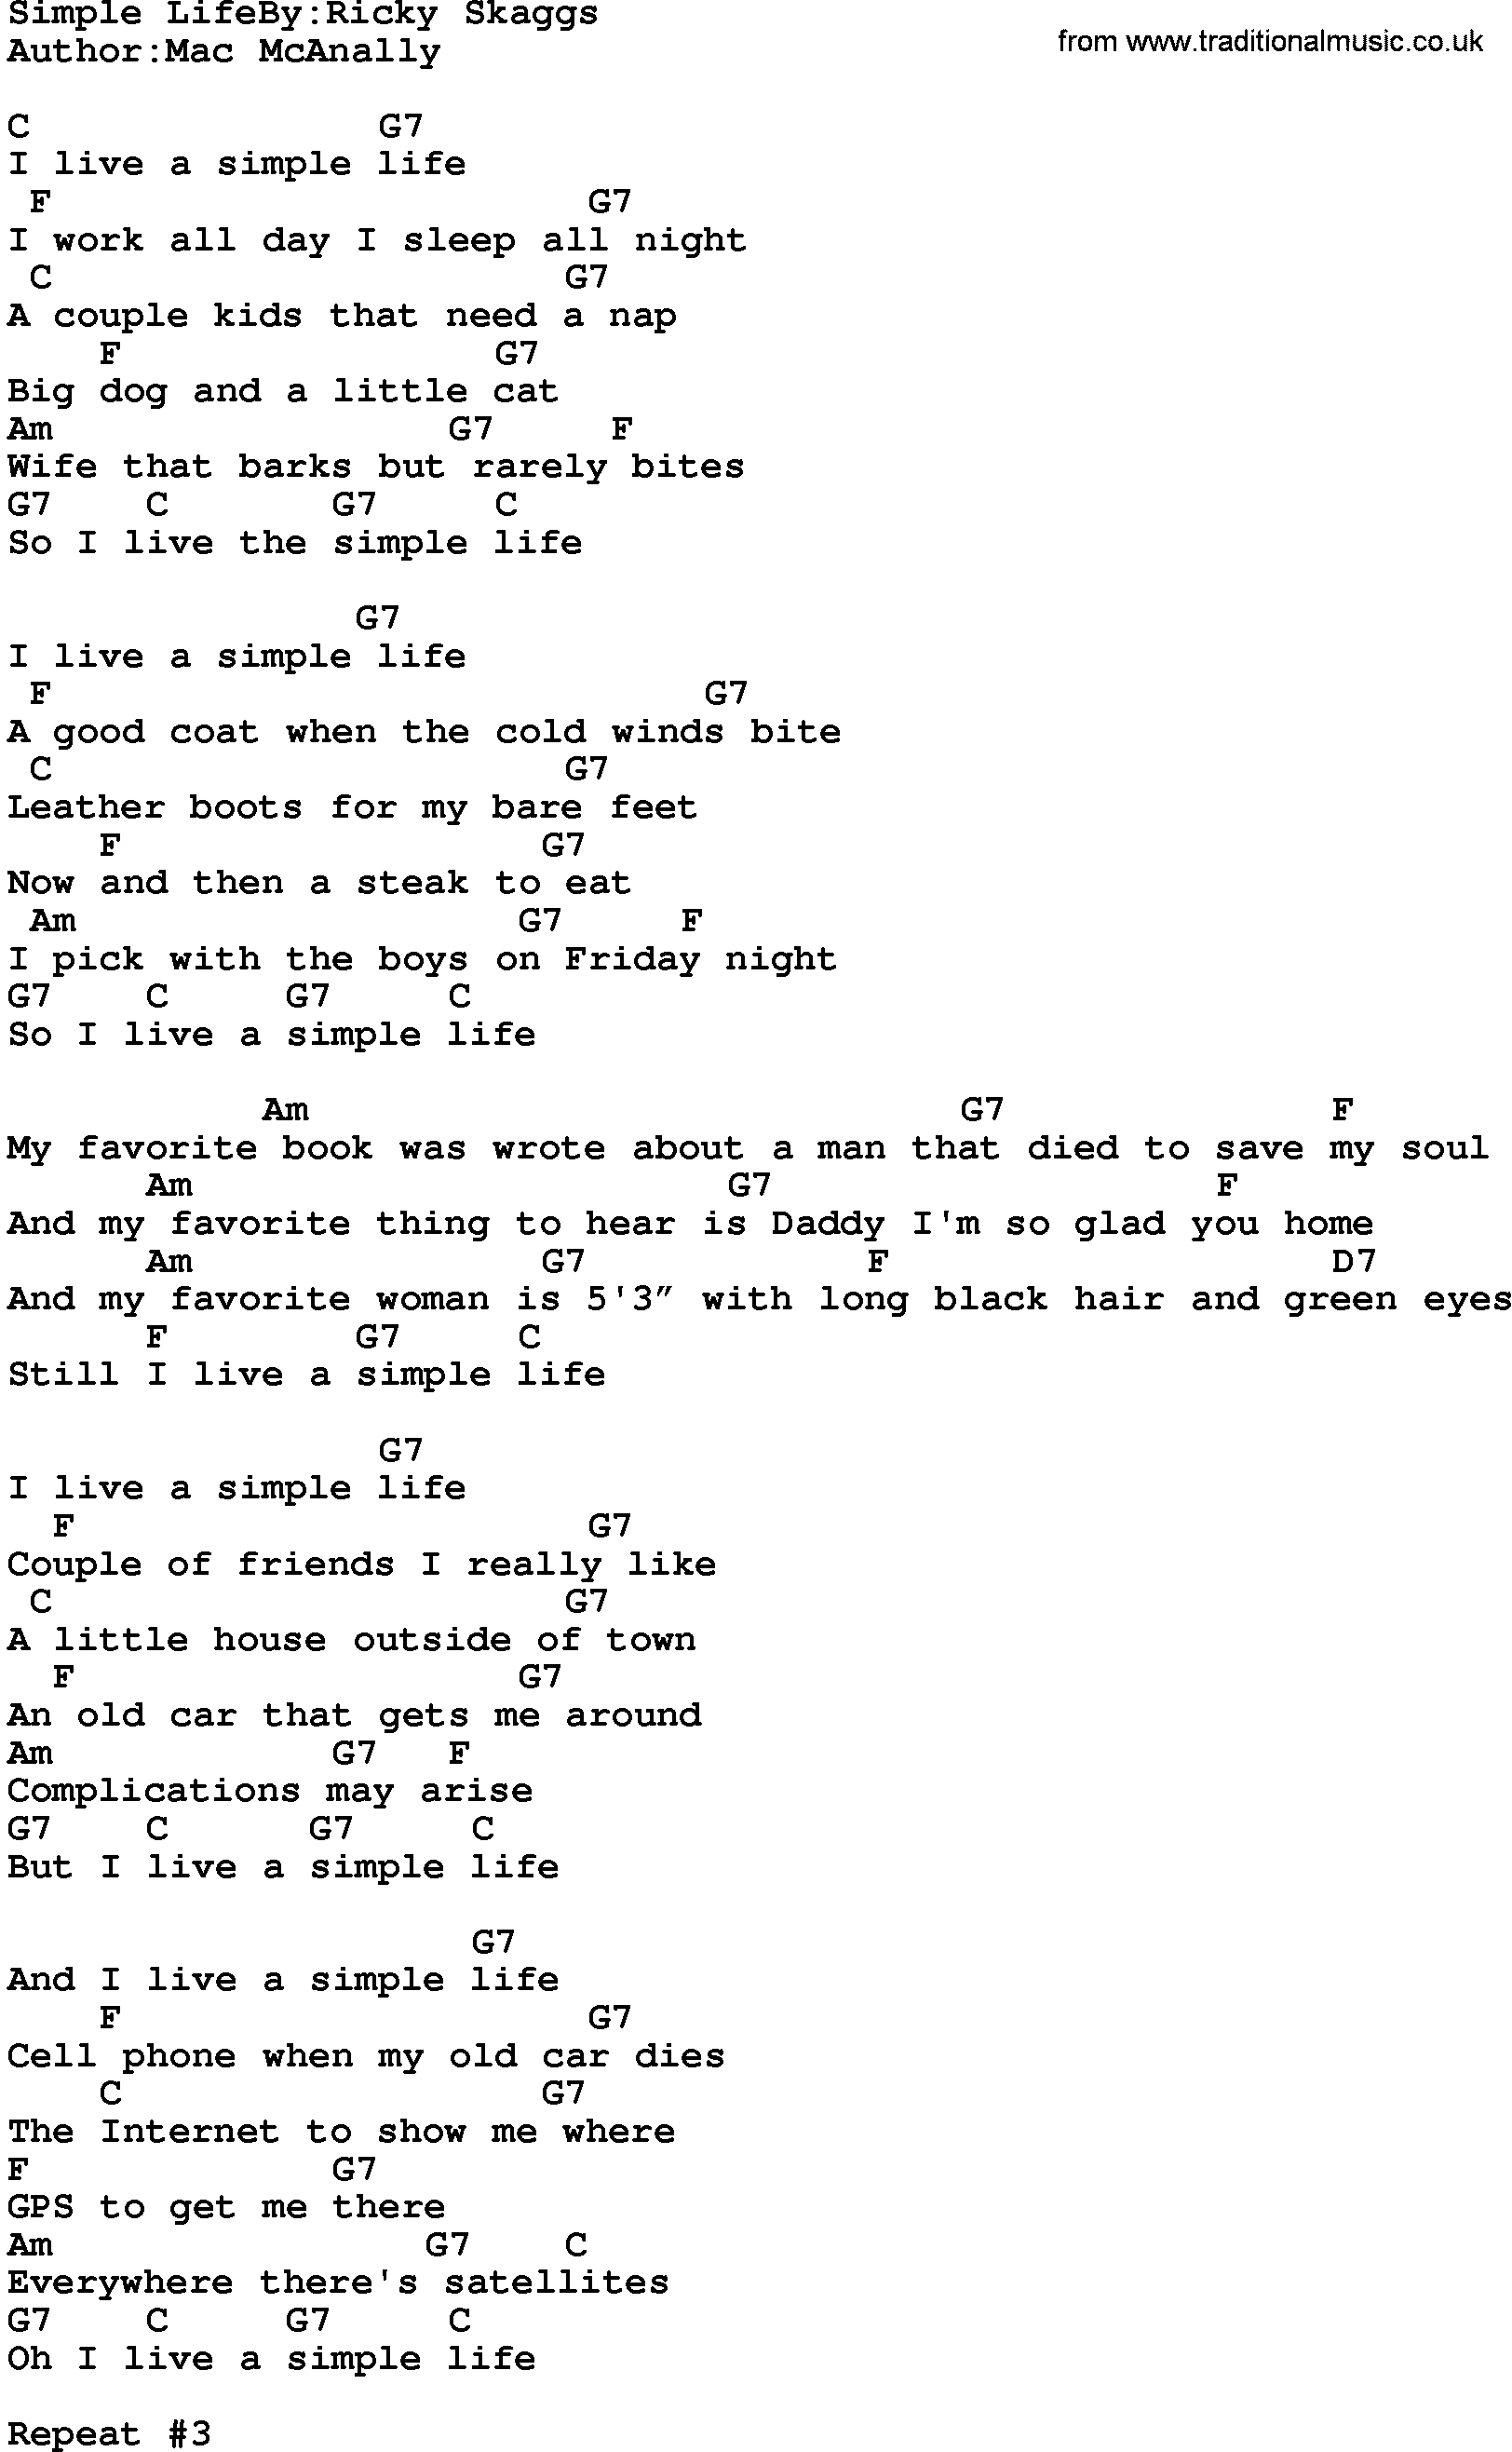 Country music song: Simple Life-Ricky Skaggs lyrics and chords